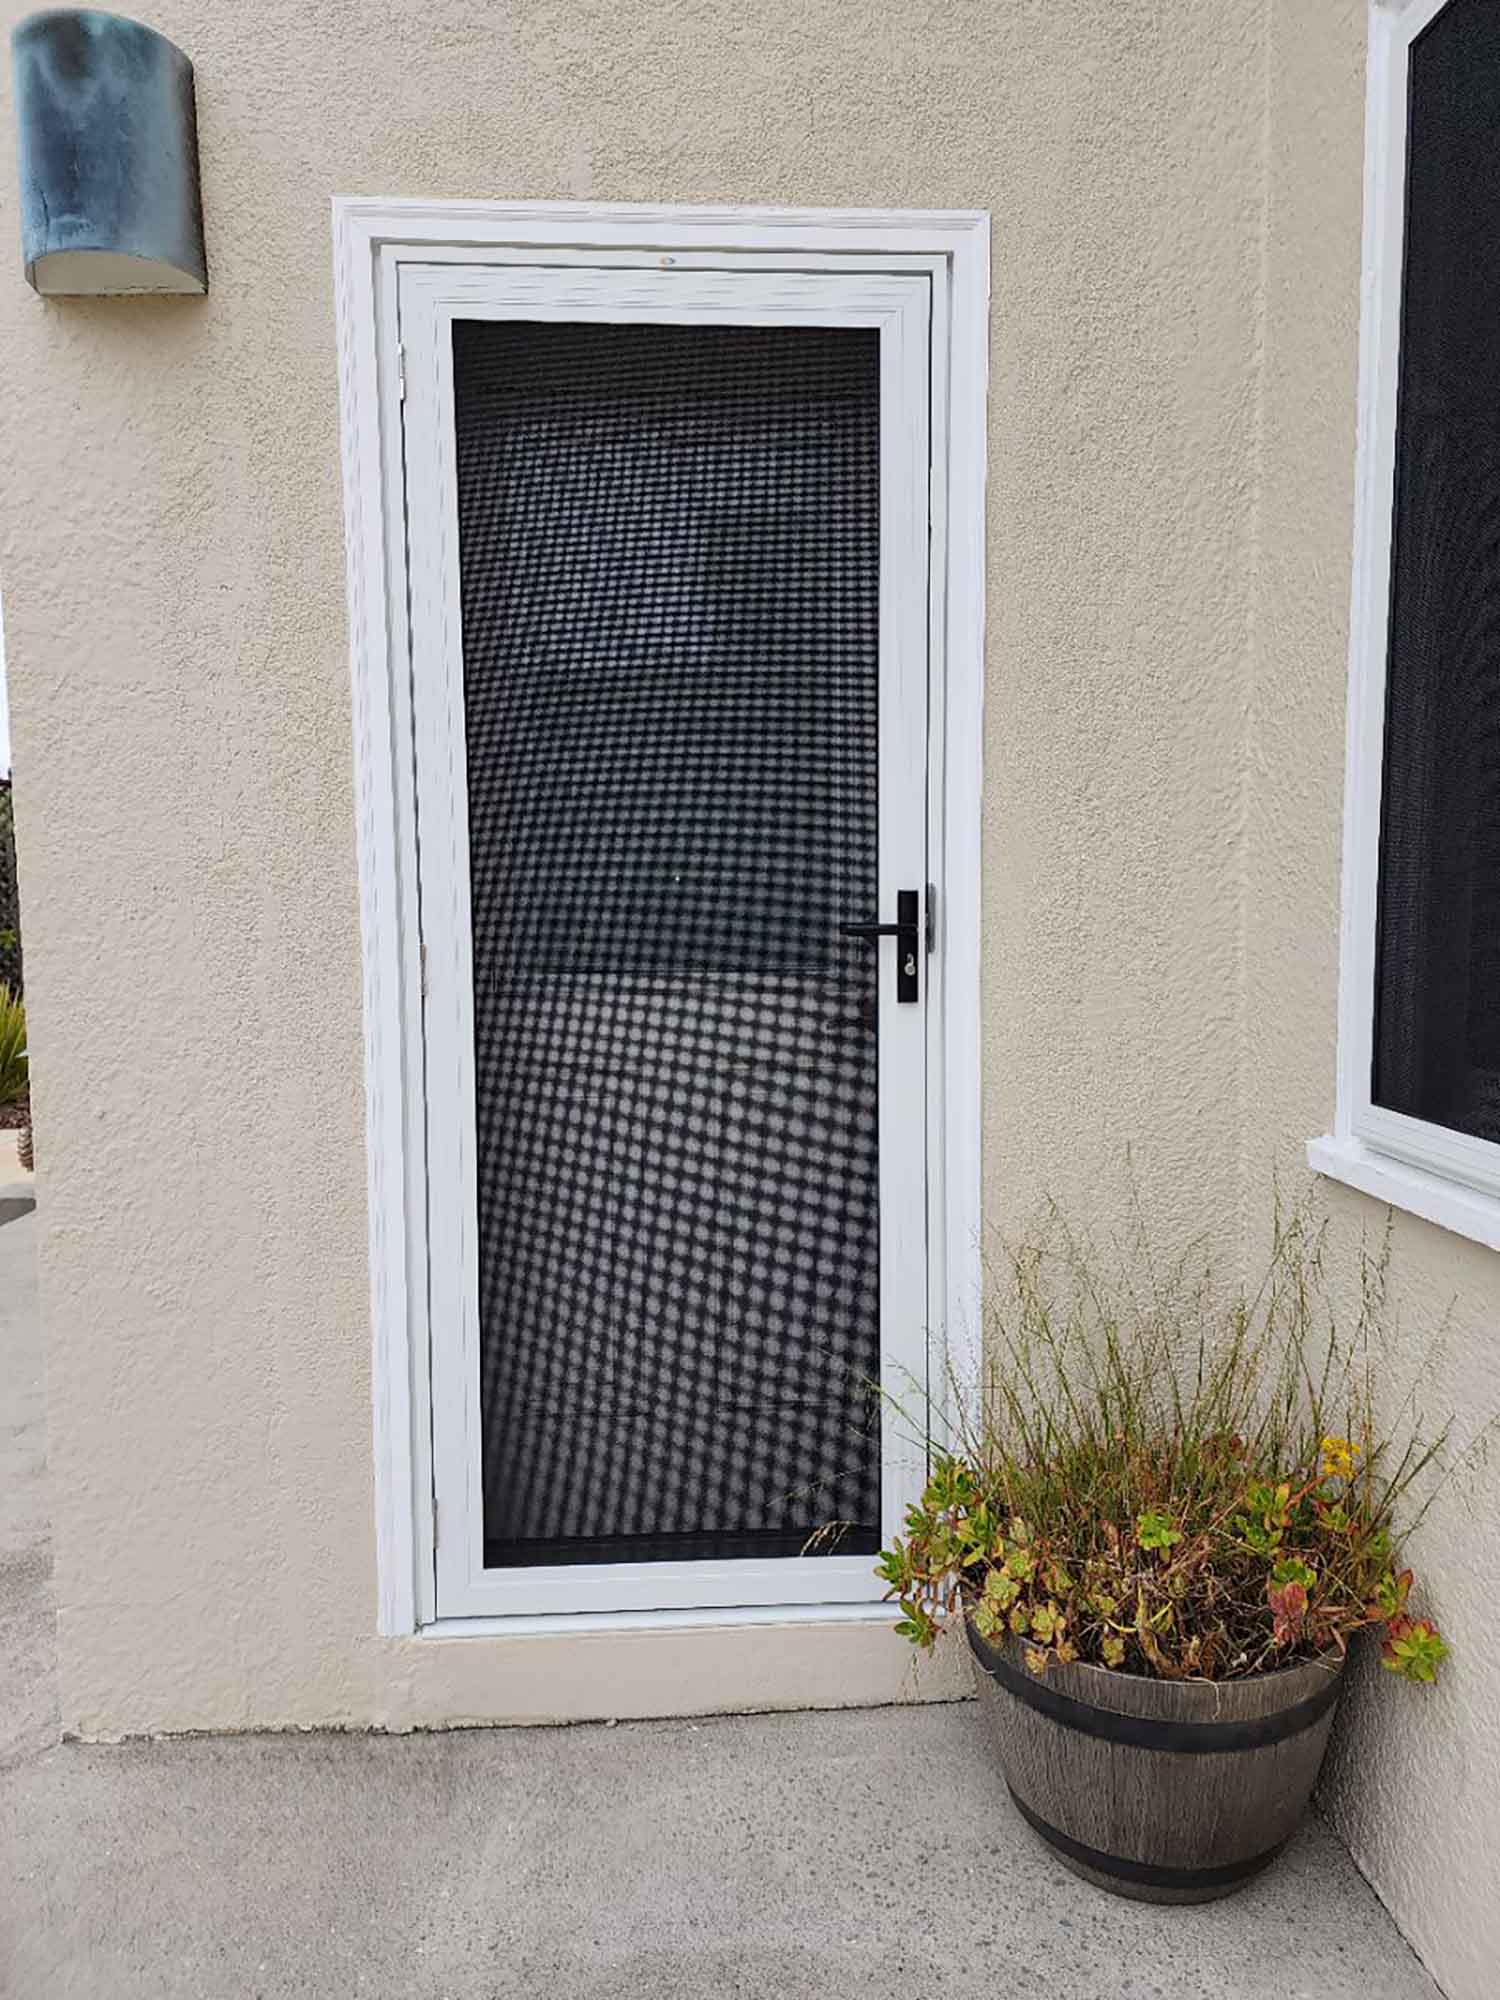 Secure Your Home with Crimsafe Security Screens. Installed by ClimatePro.